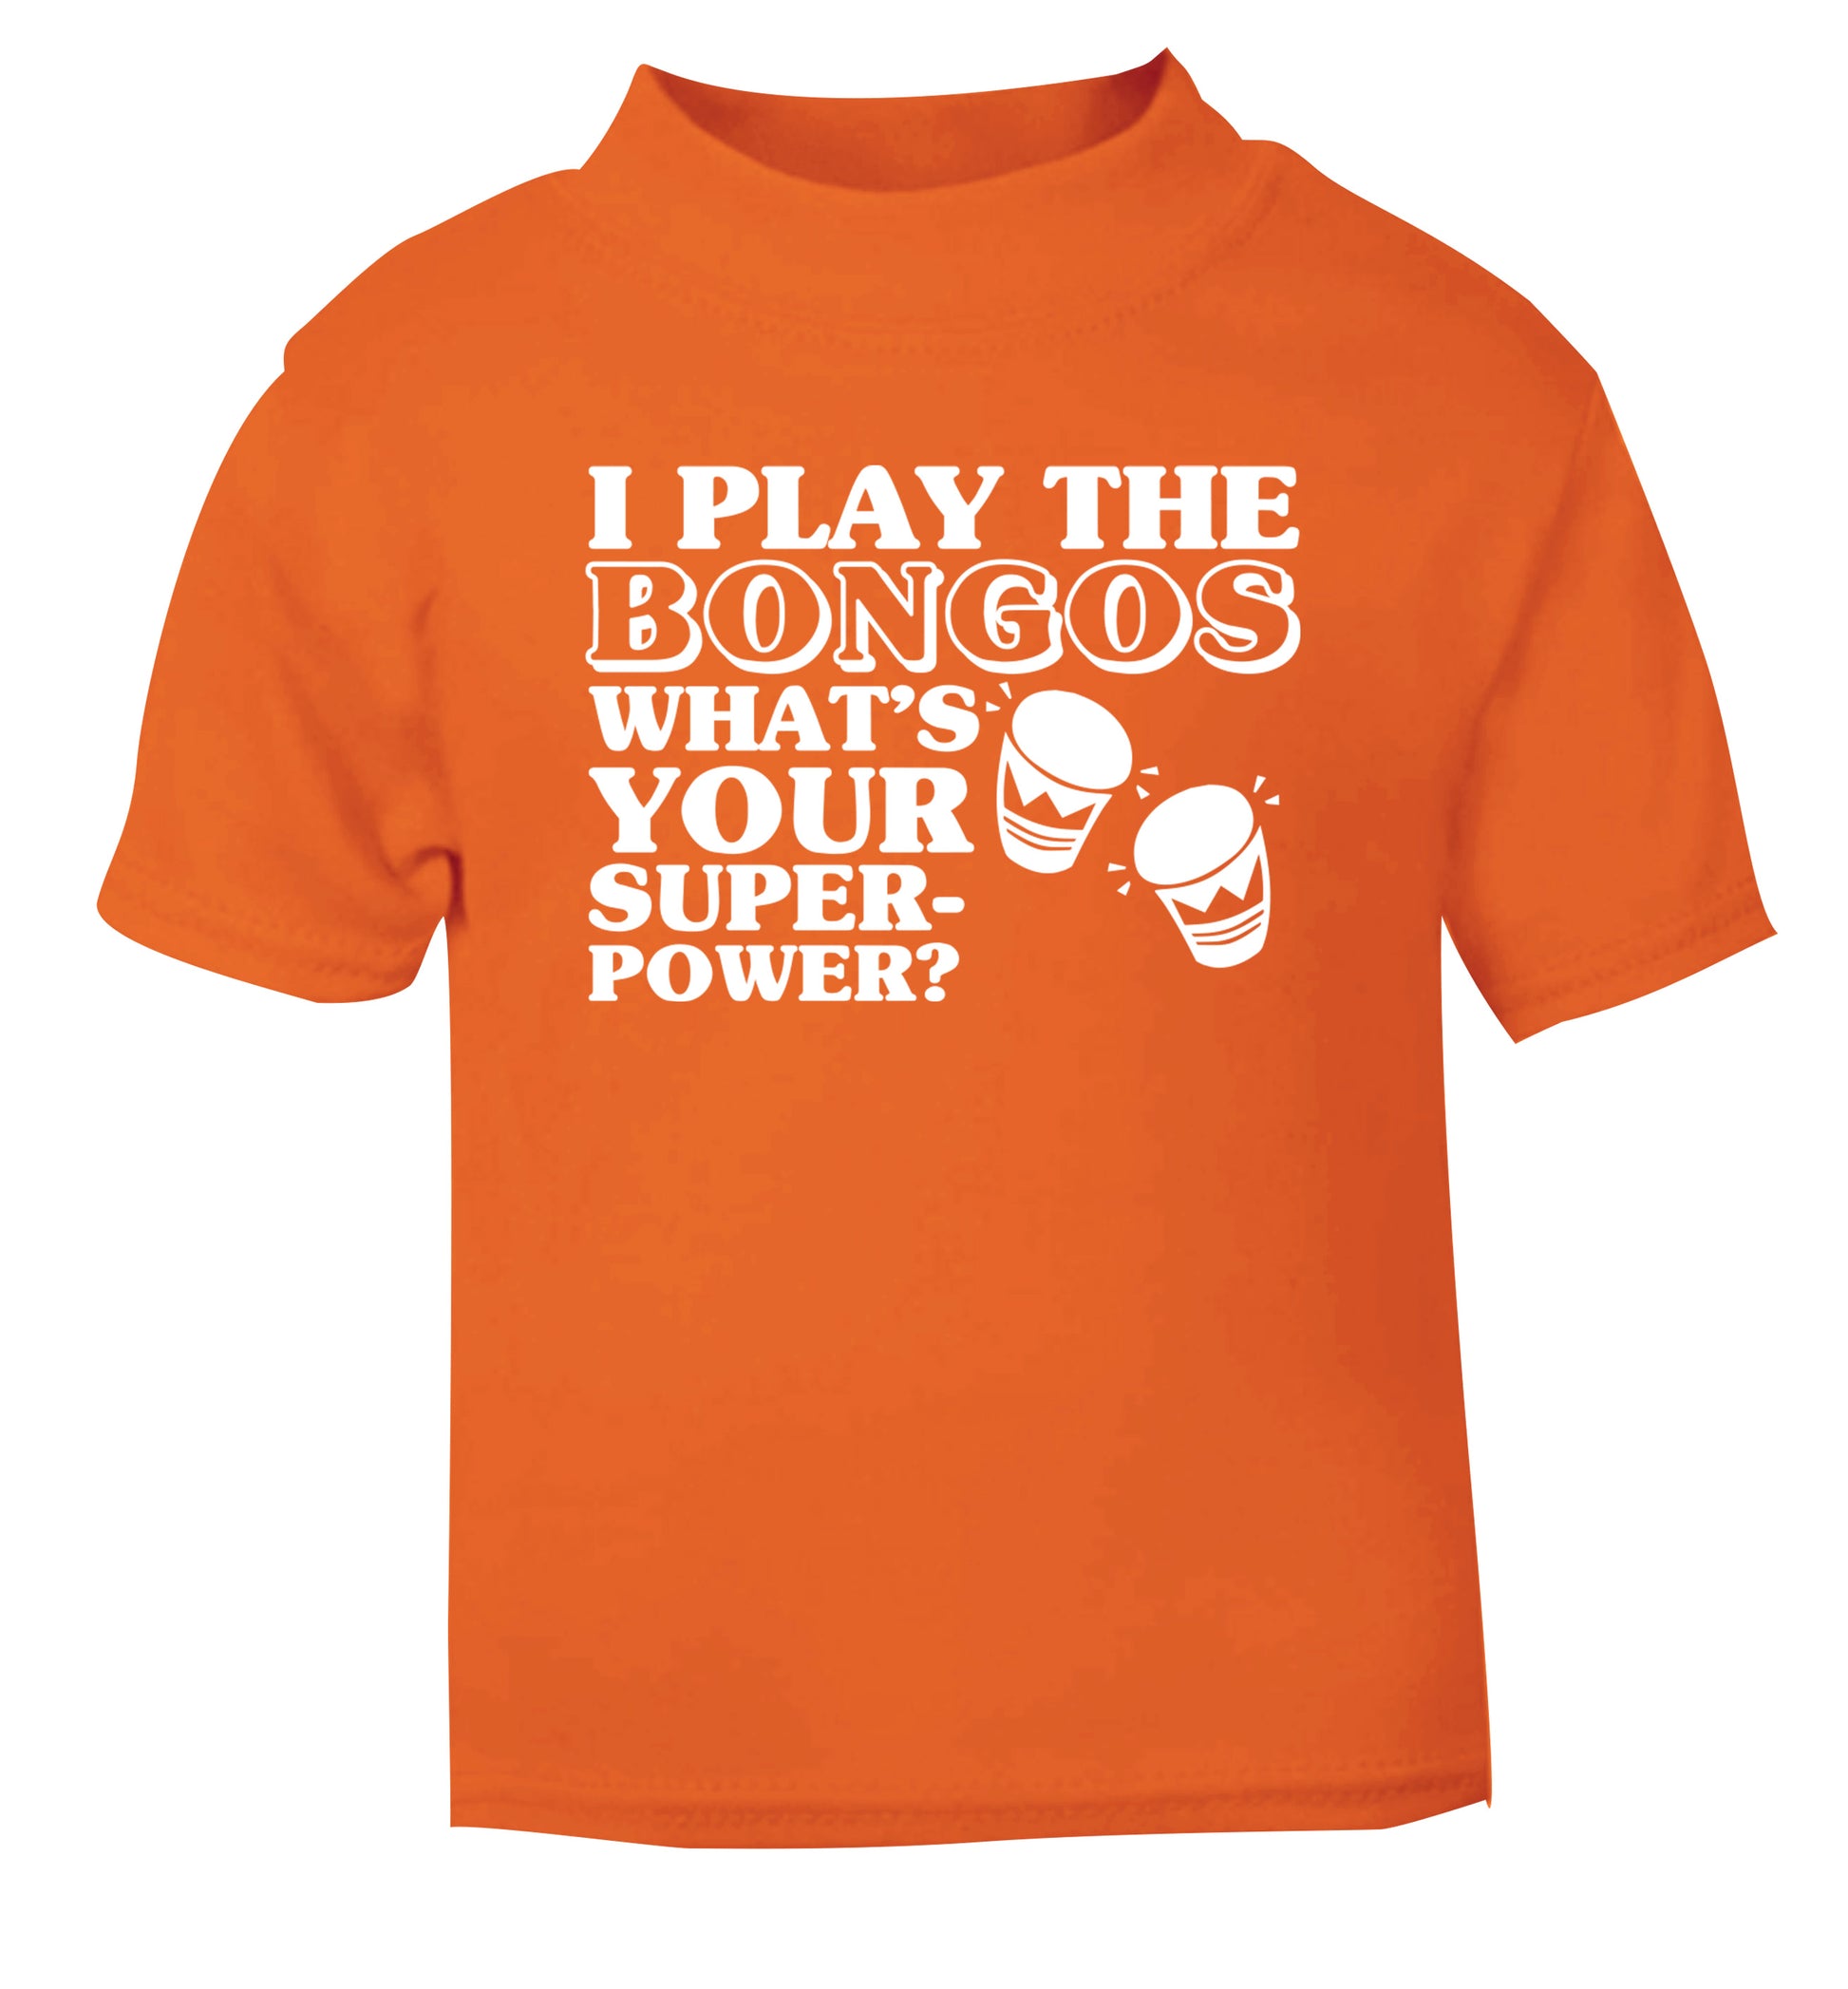 I play the bongos what's your superpower? orange Baby Toddler Tshirt 2 Years